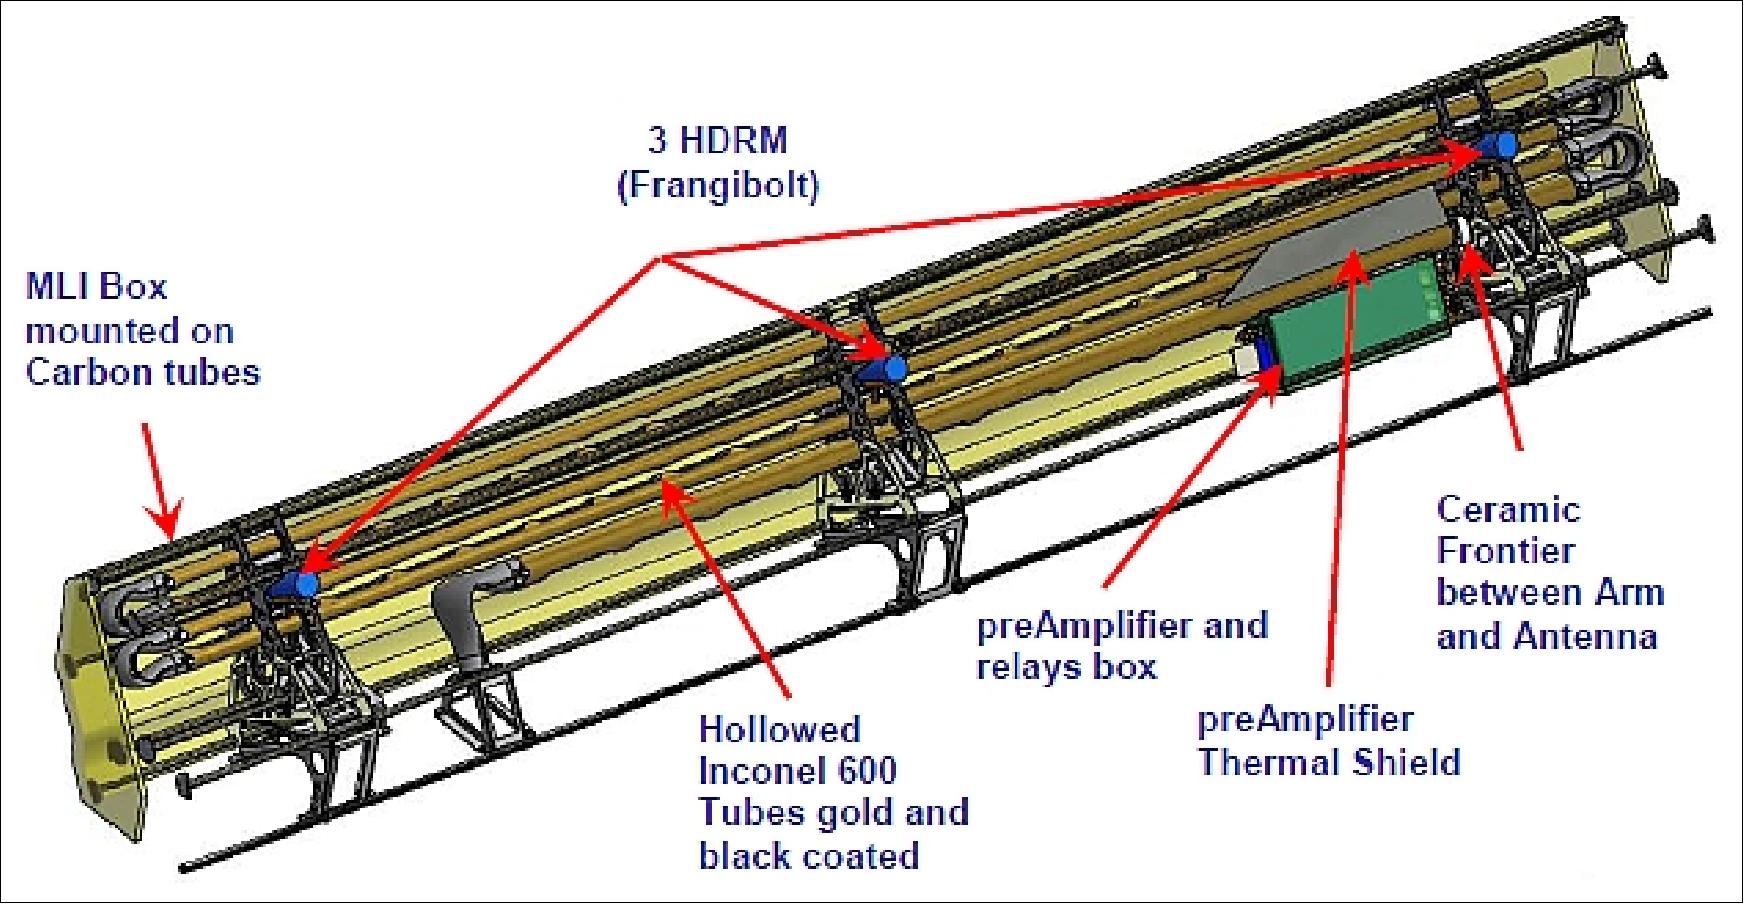 Figure 96: RPW antenna overview in stowed configuration (image credit: ESA)